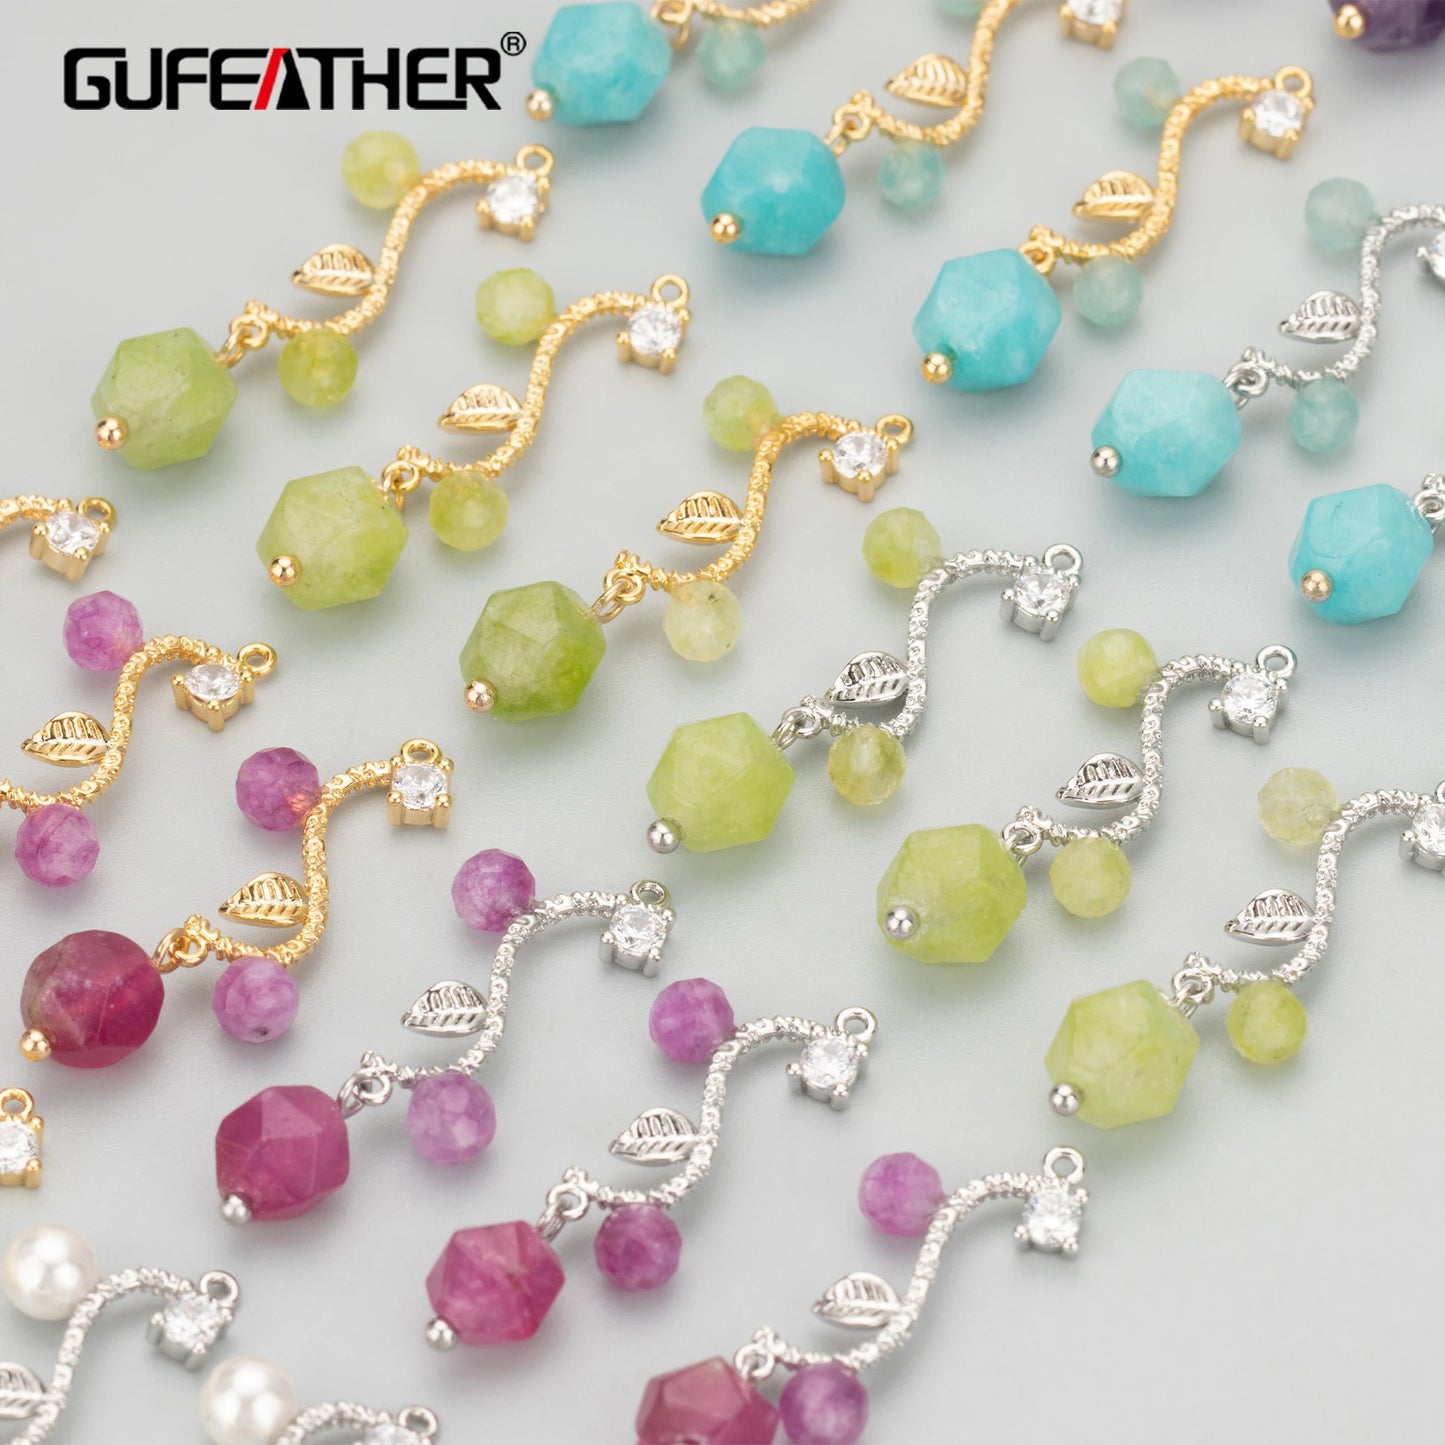 GUFEATHER MC72,jewelry accessories,18k gold rhodium plated,copper,natural stone,charms,jewelry making,diy pendants,6pcs/lot